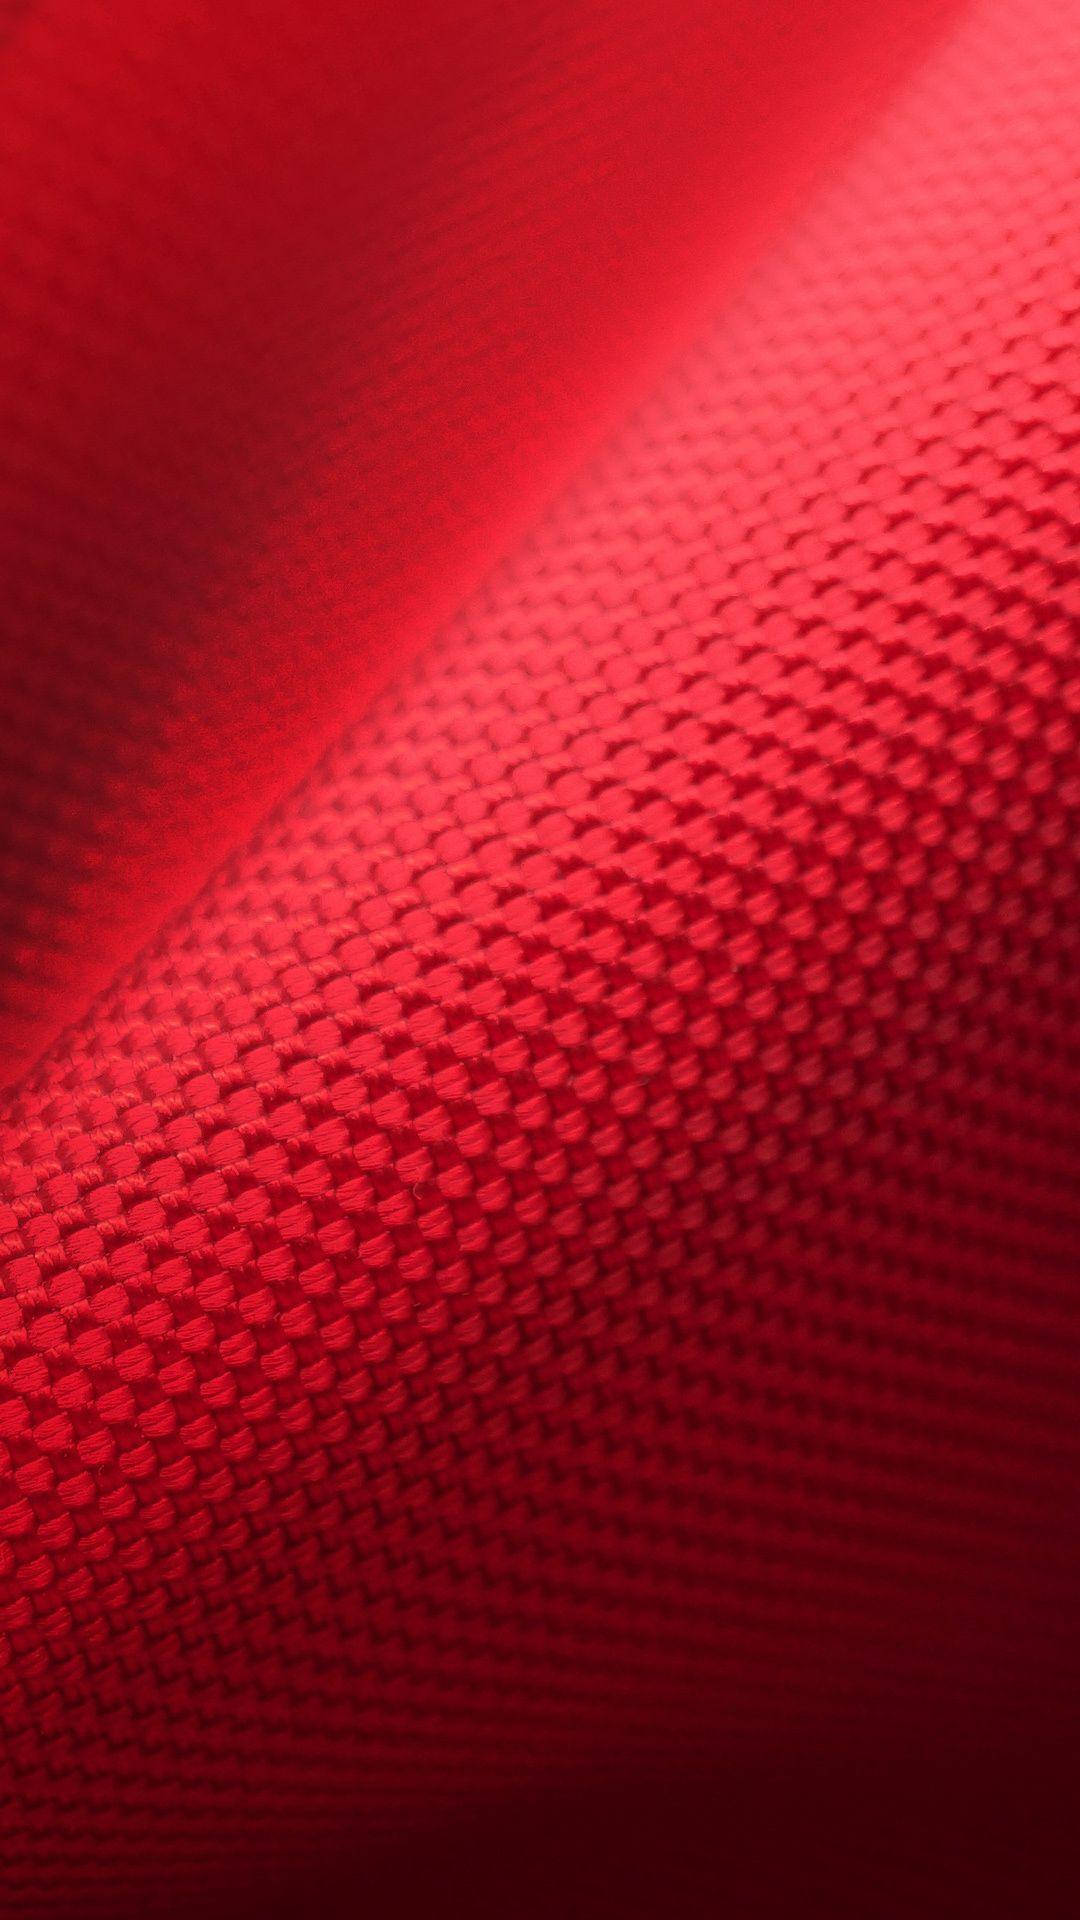 Woven Fabric Red Iphone Wallpaper